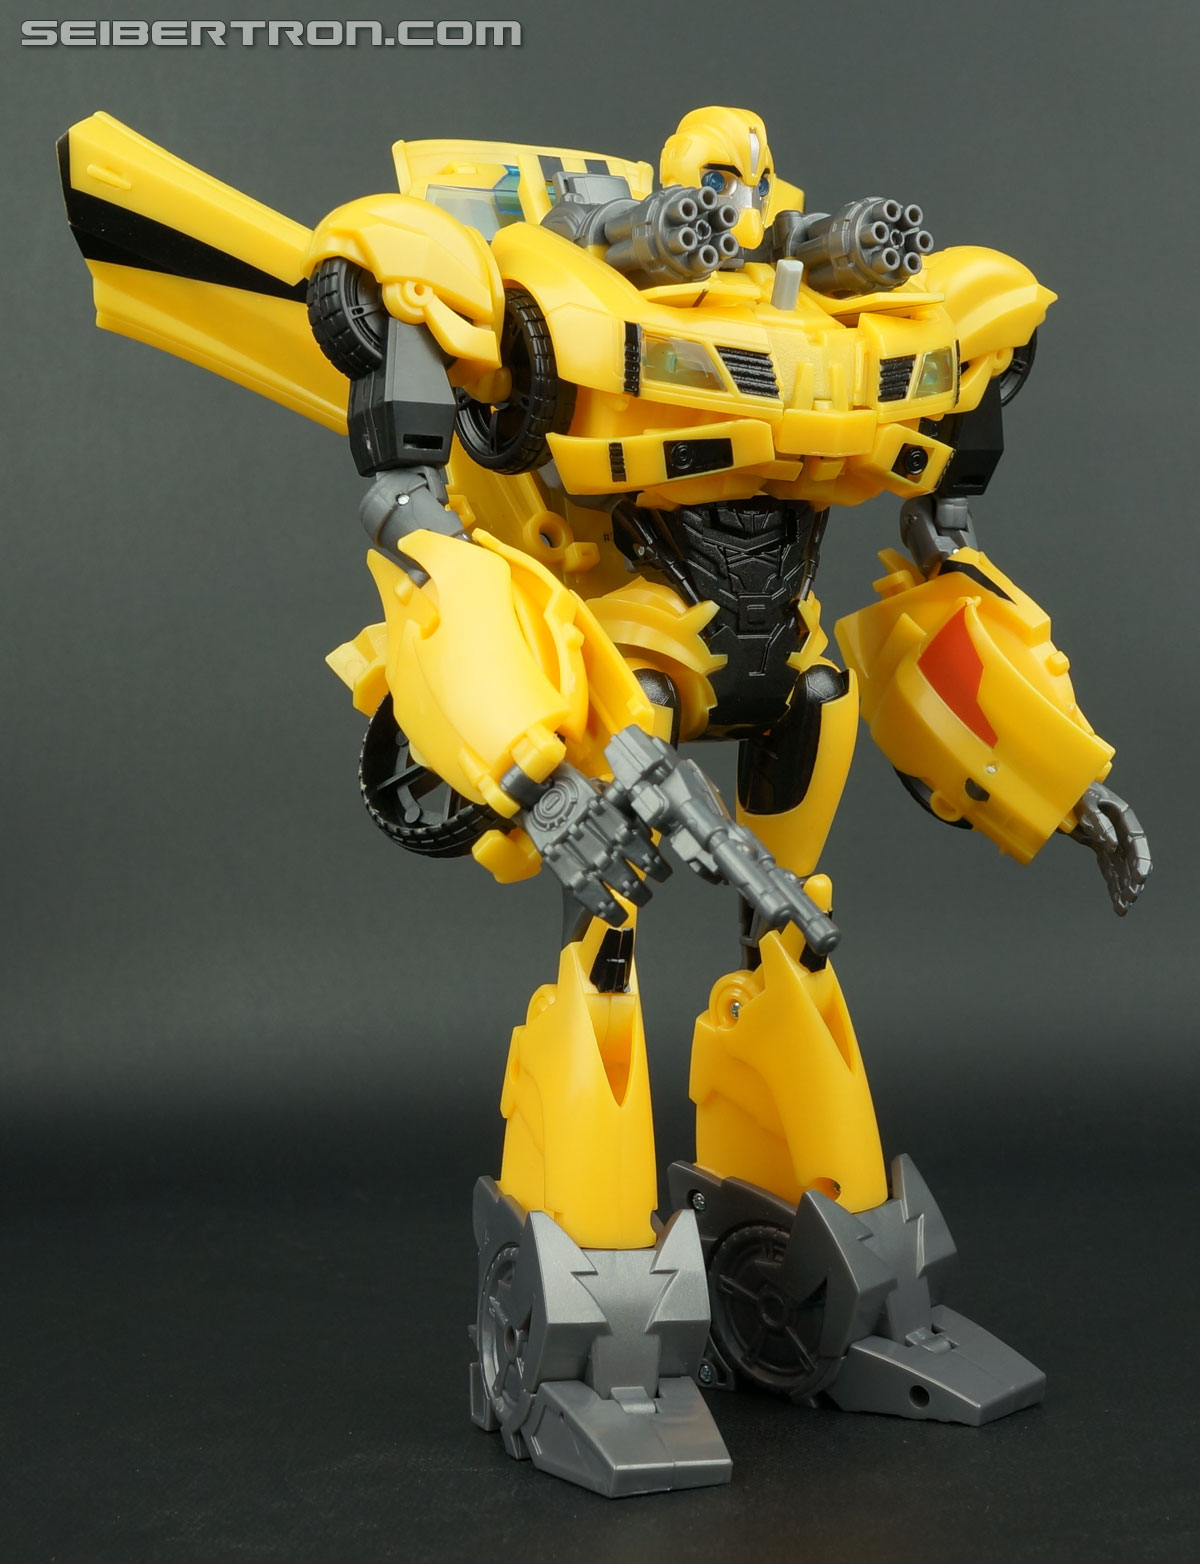 Transformers Prime: Robots In Disguise Bumblebee (Image #120 of 164)